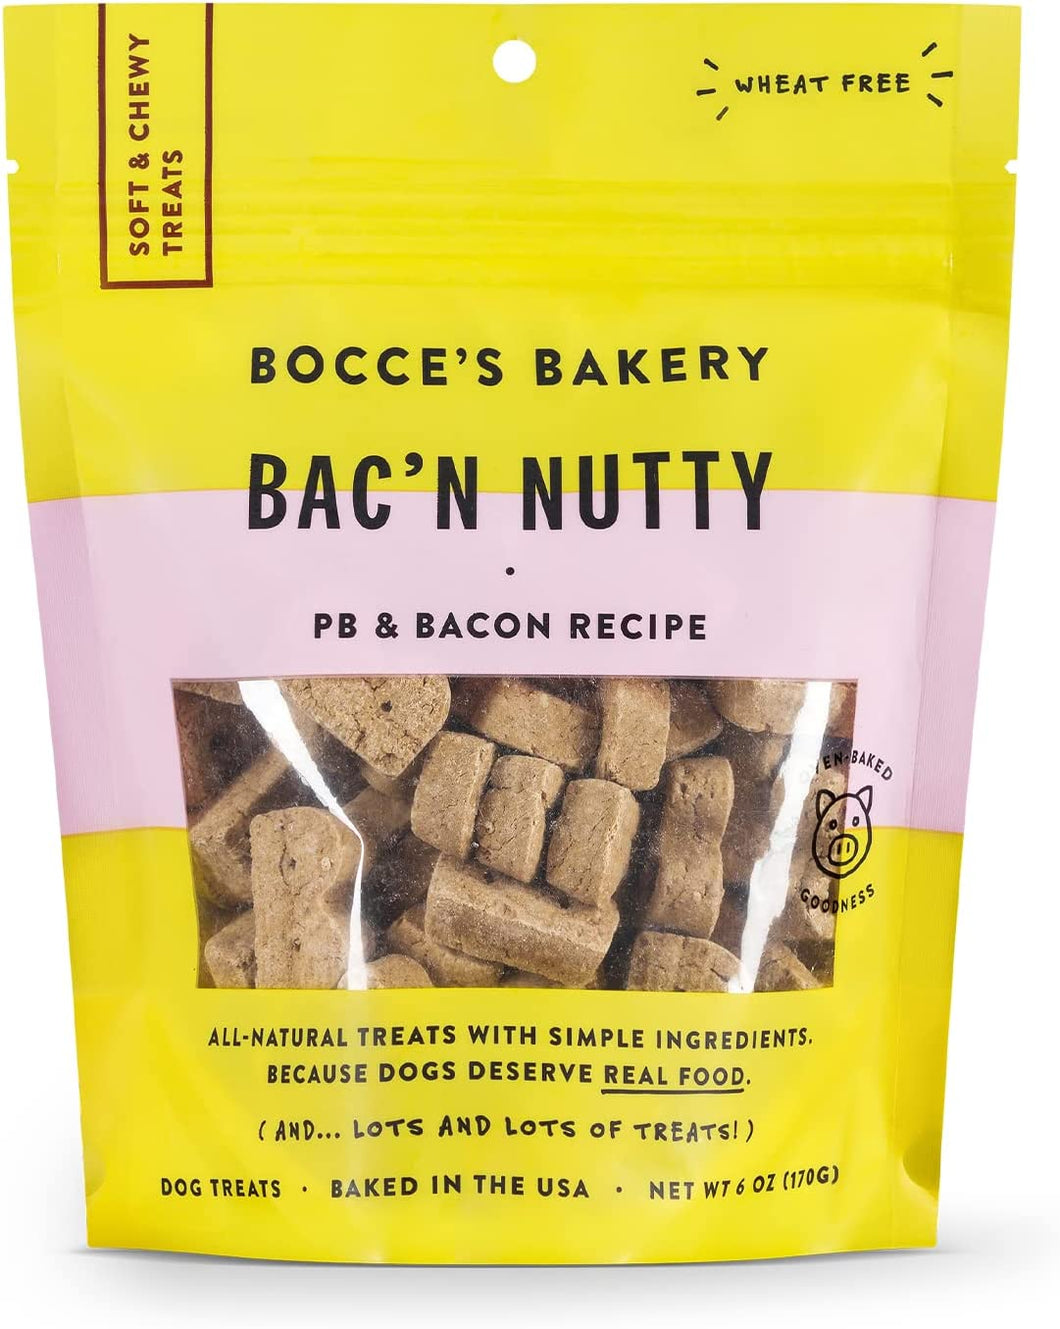 Bocce's Bakery Oven Baked Bac'N Nutty Treats for Dogs PB & Bacon Recipe 6 oz